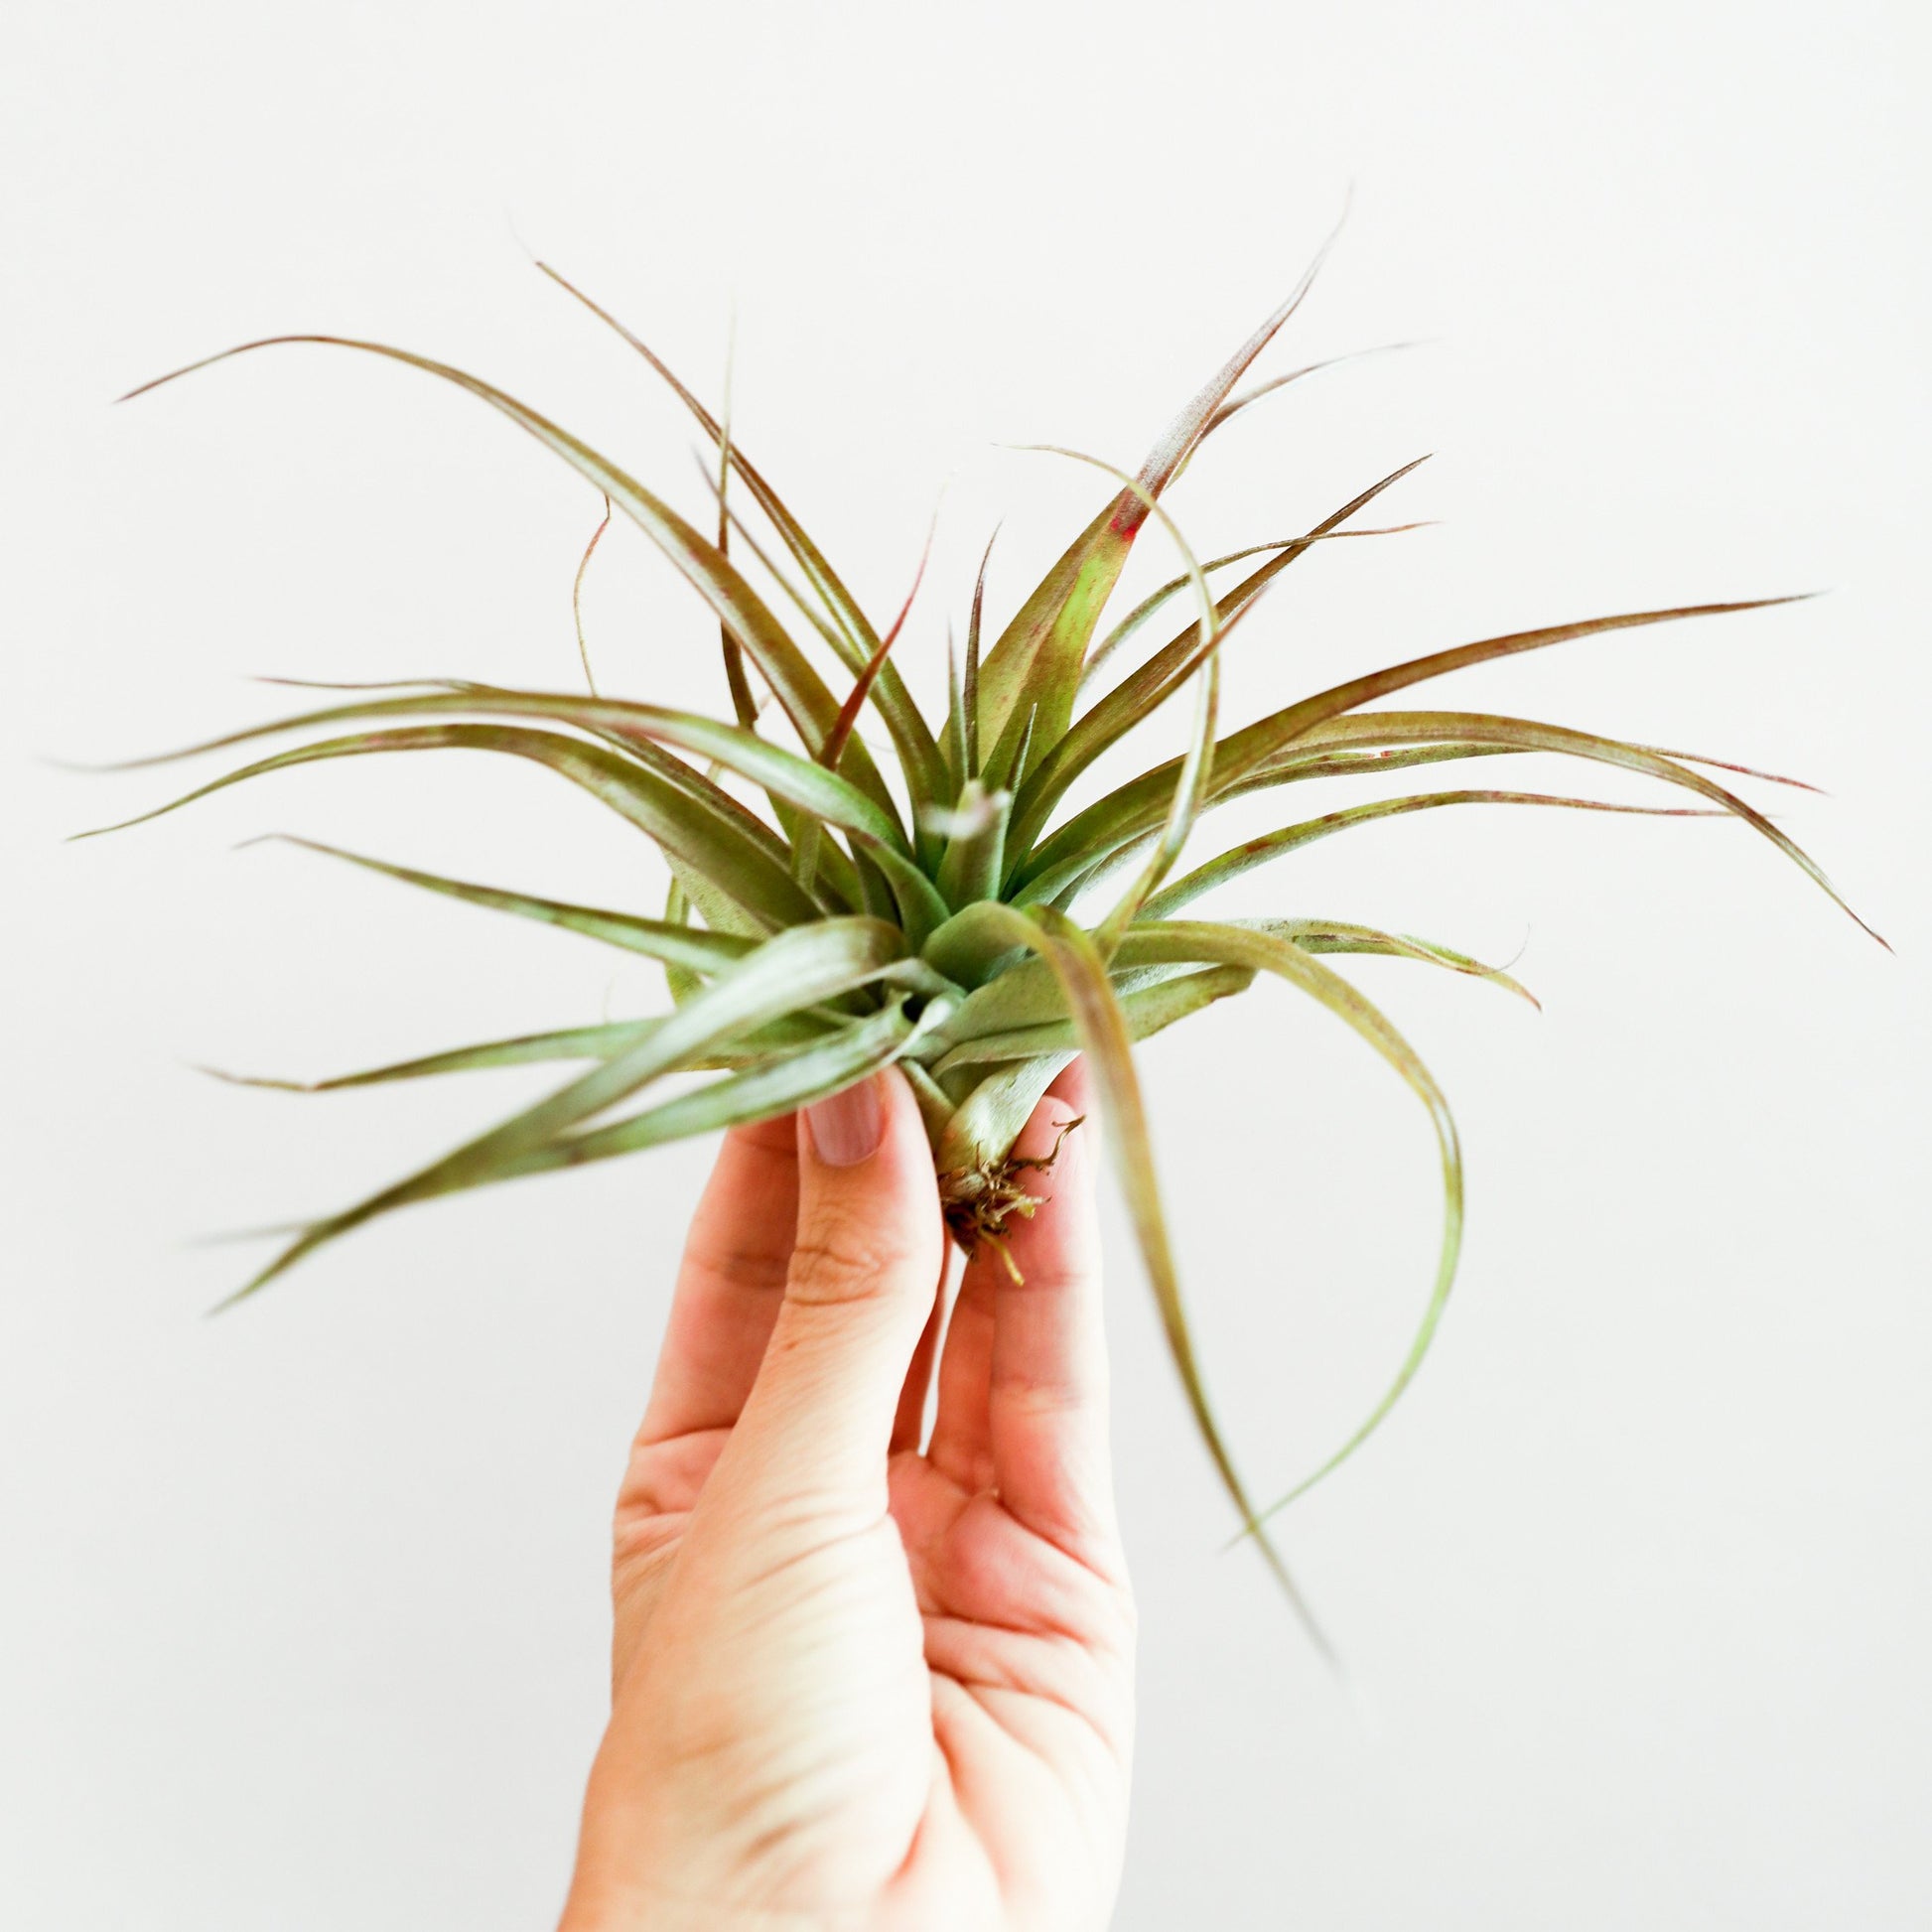 On a white background is a Tillandsia Brachycaulos being held up by a model's hand.